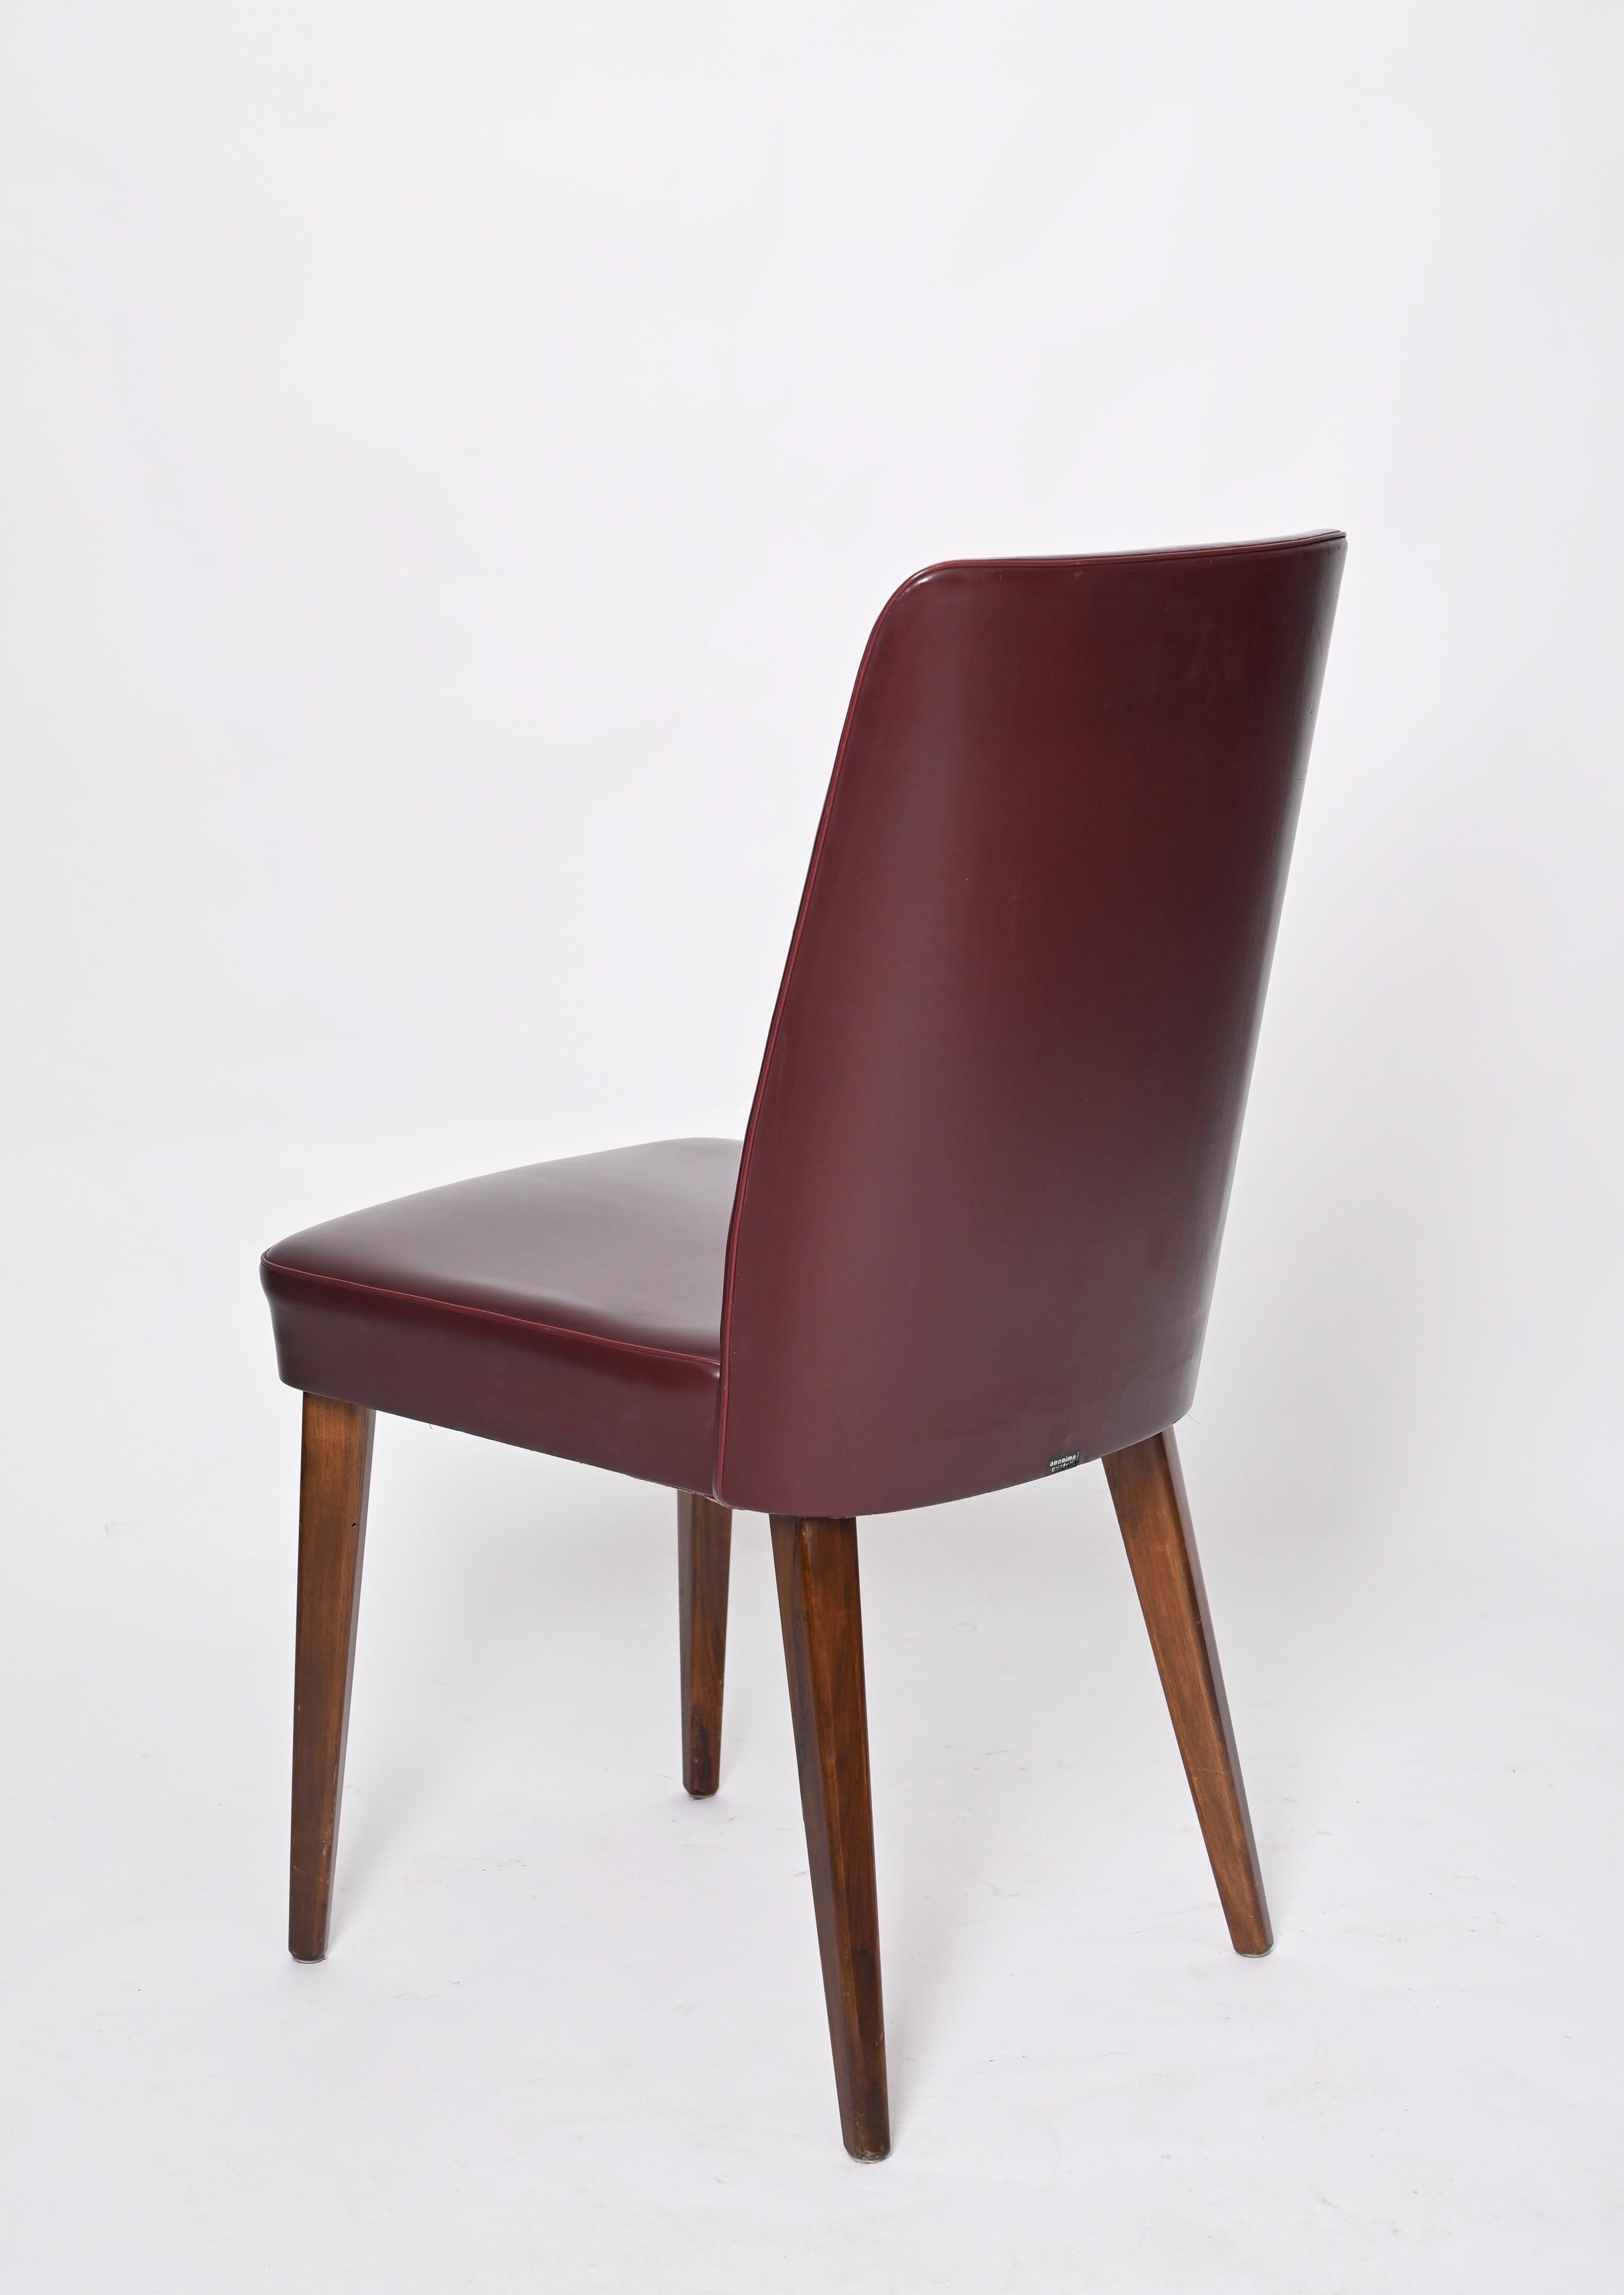 20th Century Pair of Bordeaux Leather Chairs by Anonima Castelli, Italy, 1950s For Sale